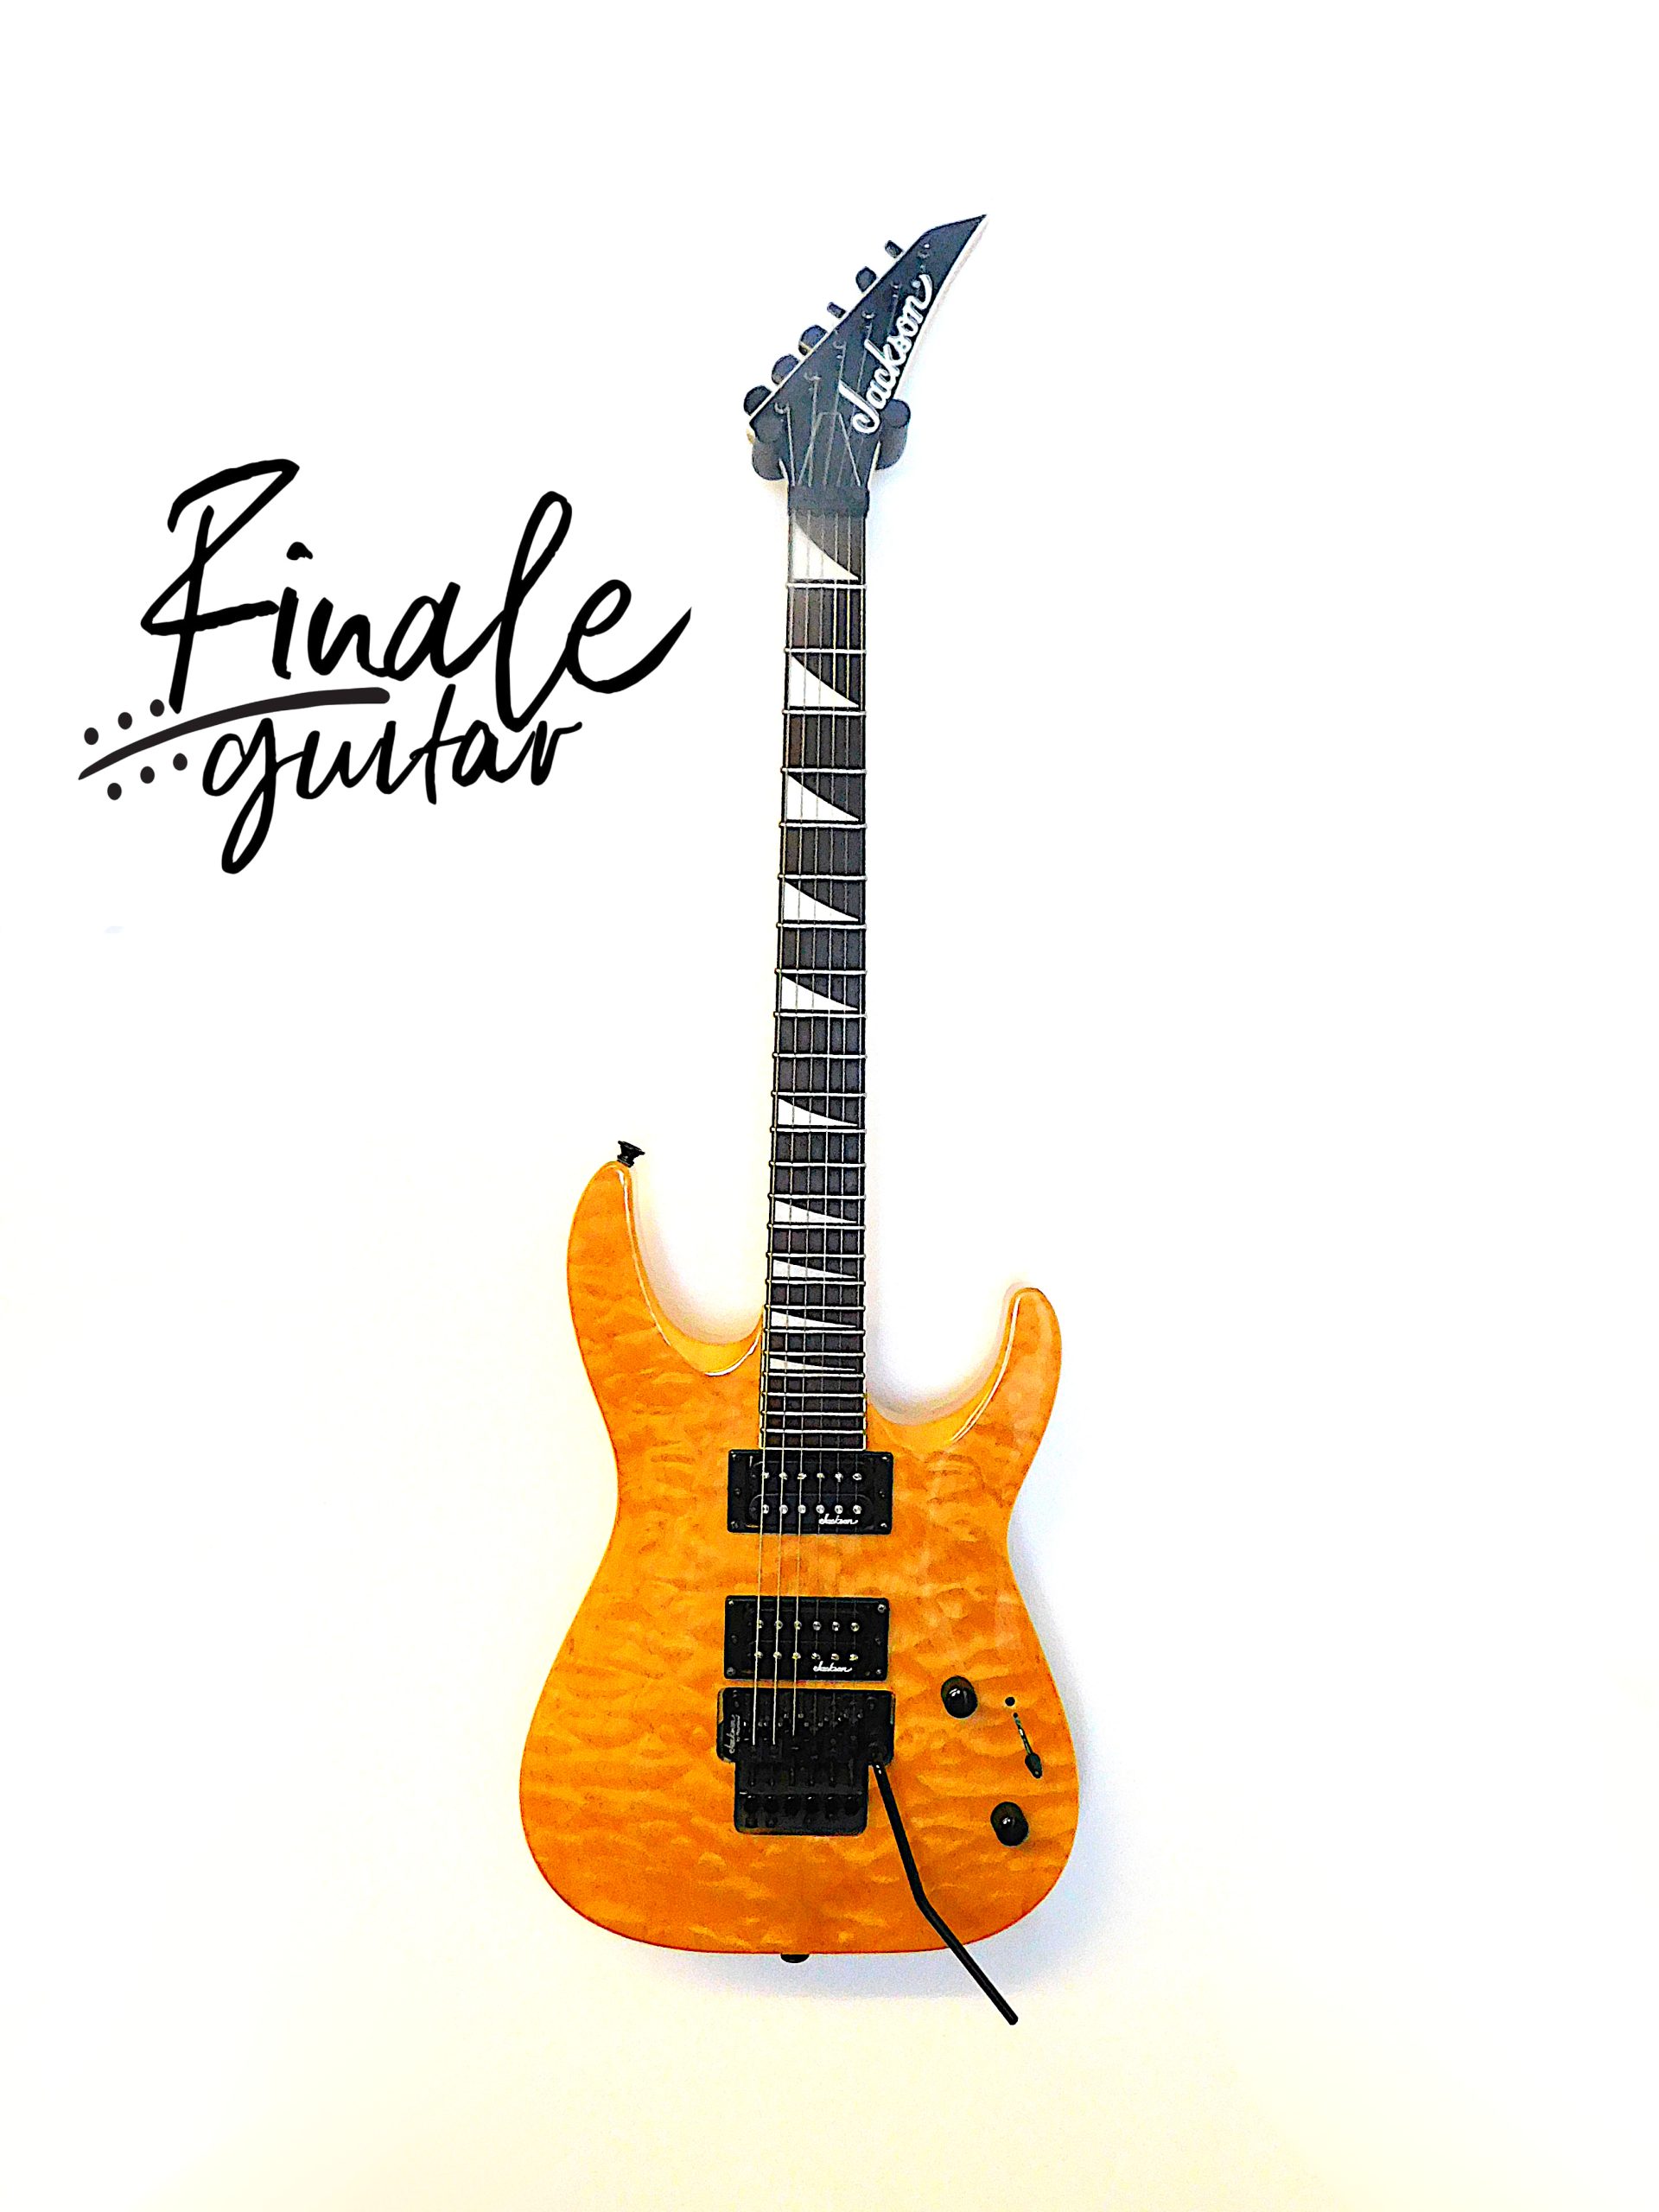 Jackson Dinky (quilted maple top, made in China 2015) with Jackson hard case for sale in our Sheffield guitar shop, Finale Guitar